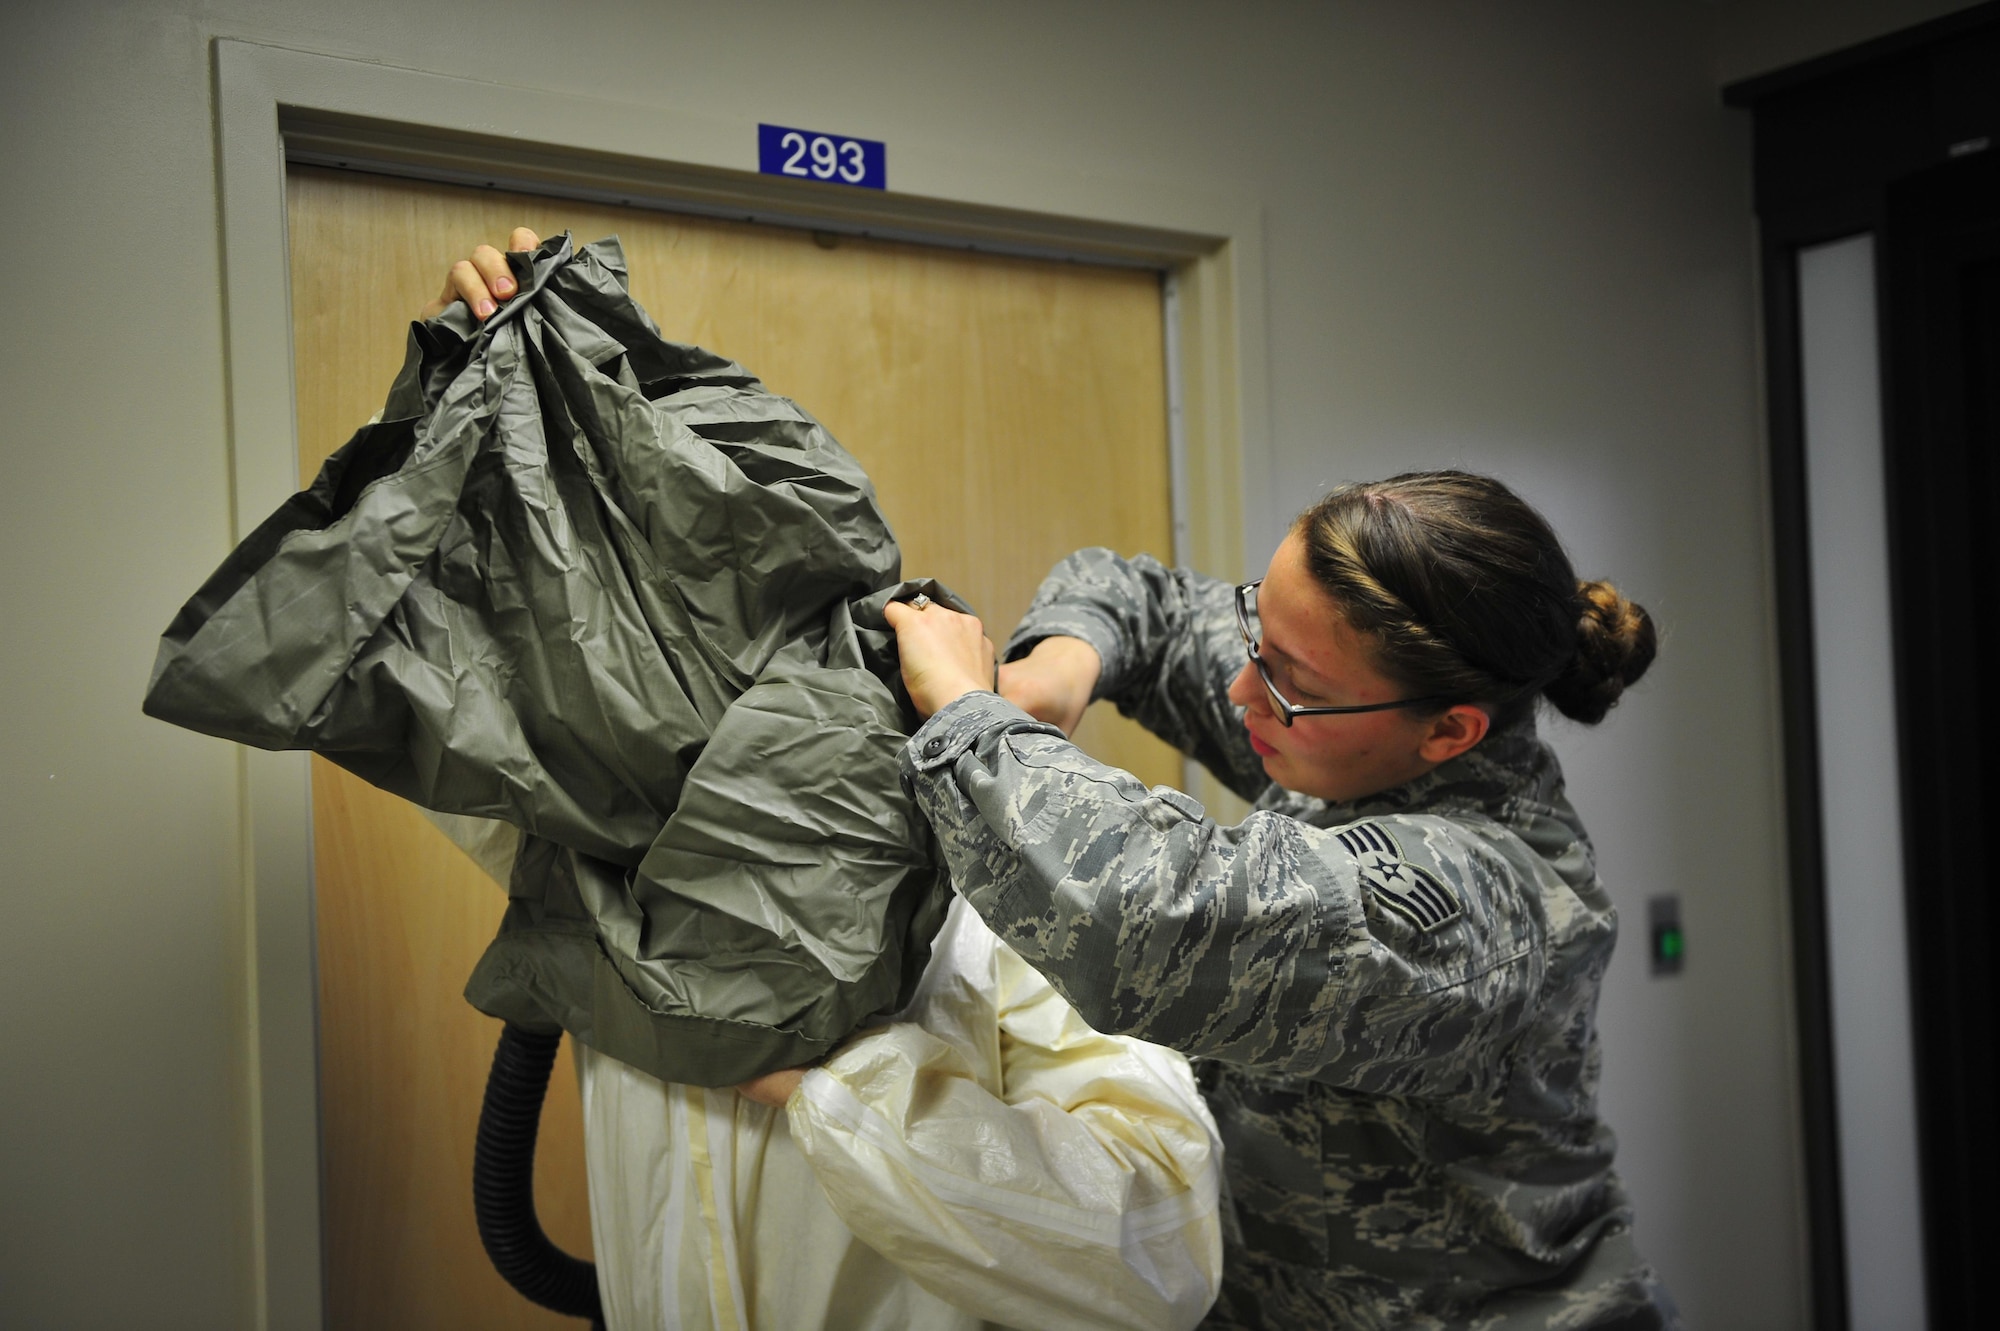 Staff Sgt. Kristina Plunkett, 1st Special Operations Dental Squadron, helps another Airman put on his protective gear during a disease containment exercise at Hurlburt Field, Fla., Feb. 4, 2015. The medical staff focused on the interaction and coordination between multiple units that would be involved in responding to a disease outbreak. (U.S. Air Force photo/Senior Airman Christopher Callaway) 